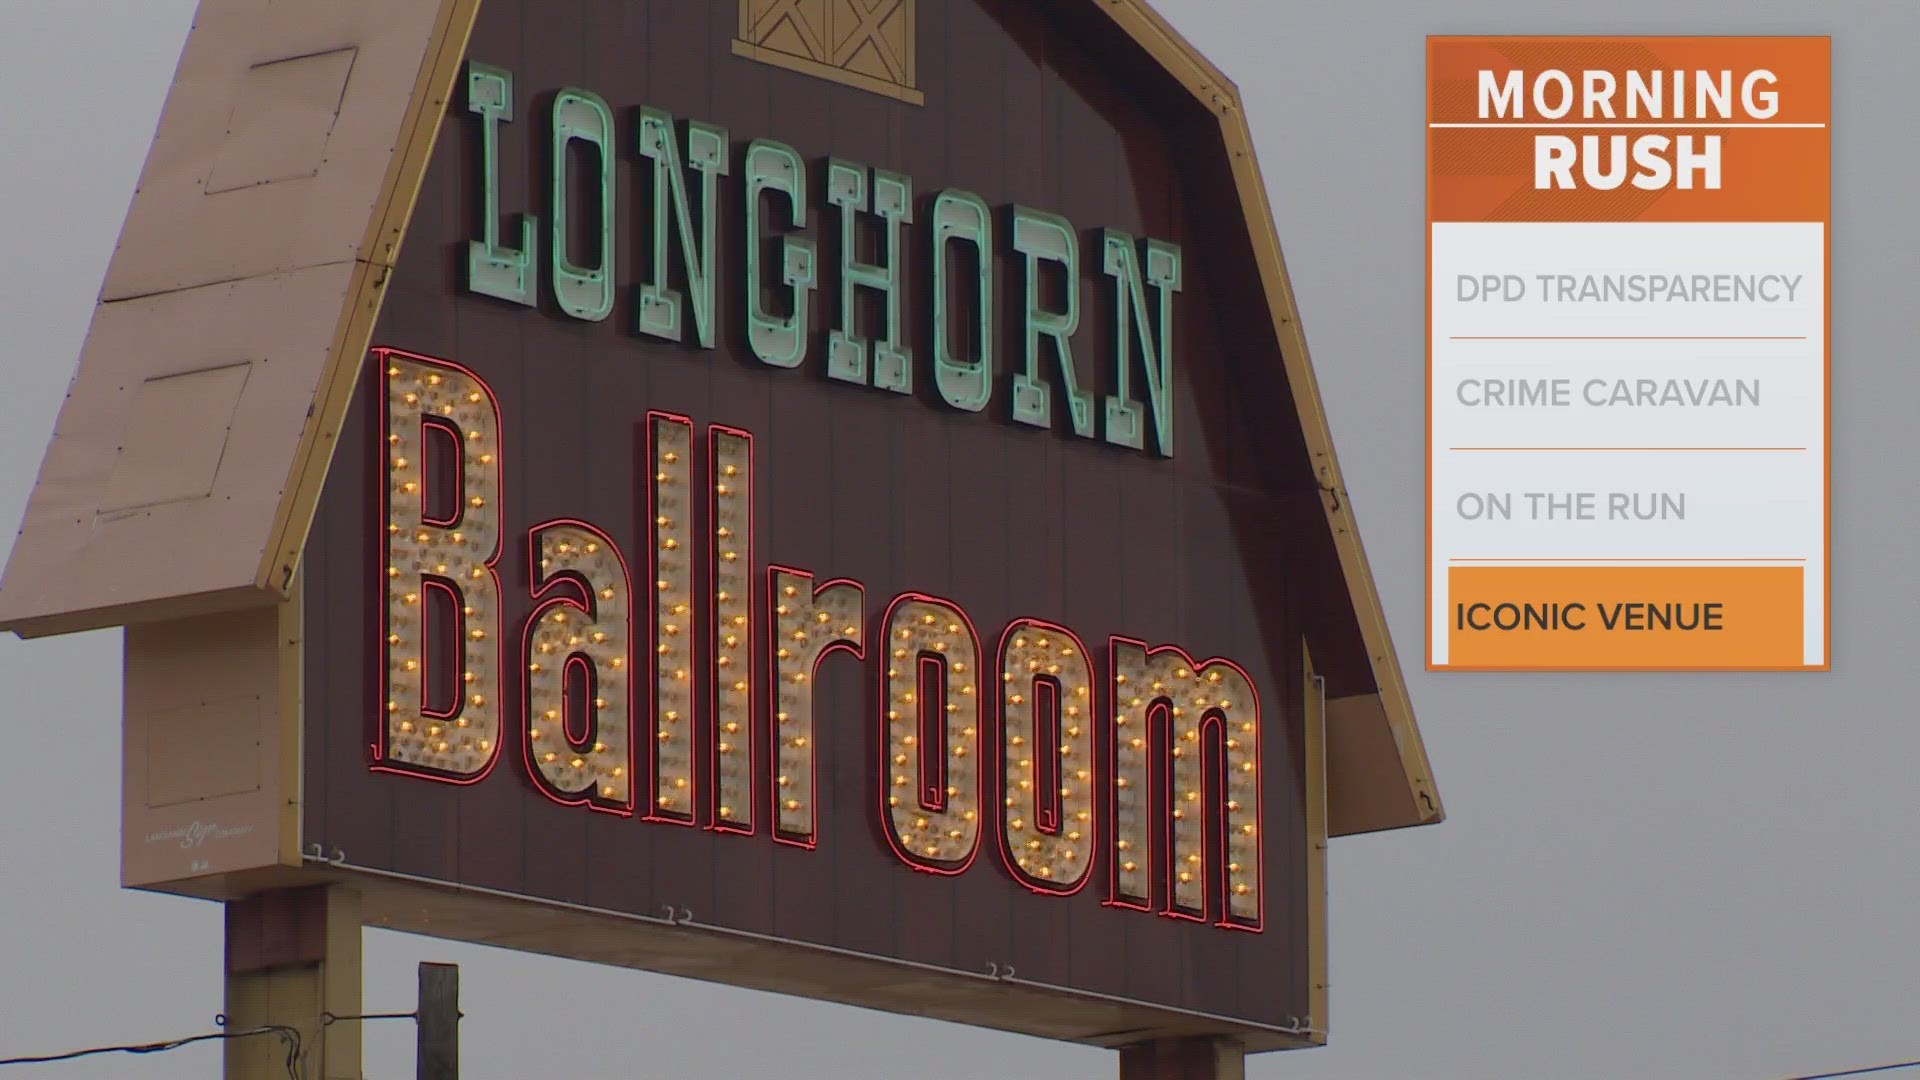 The Longhorn Ballroom is opening again.